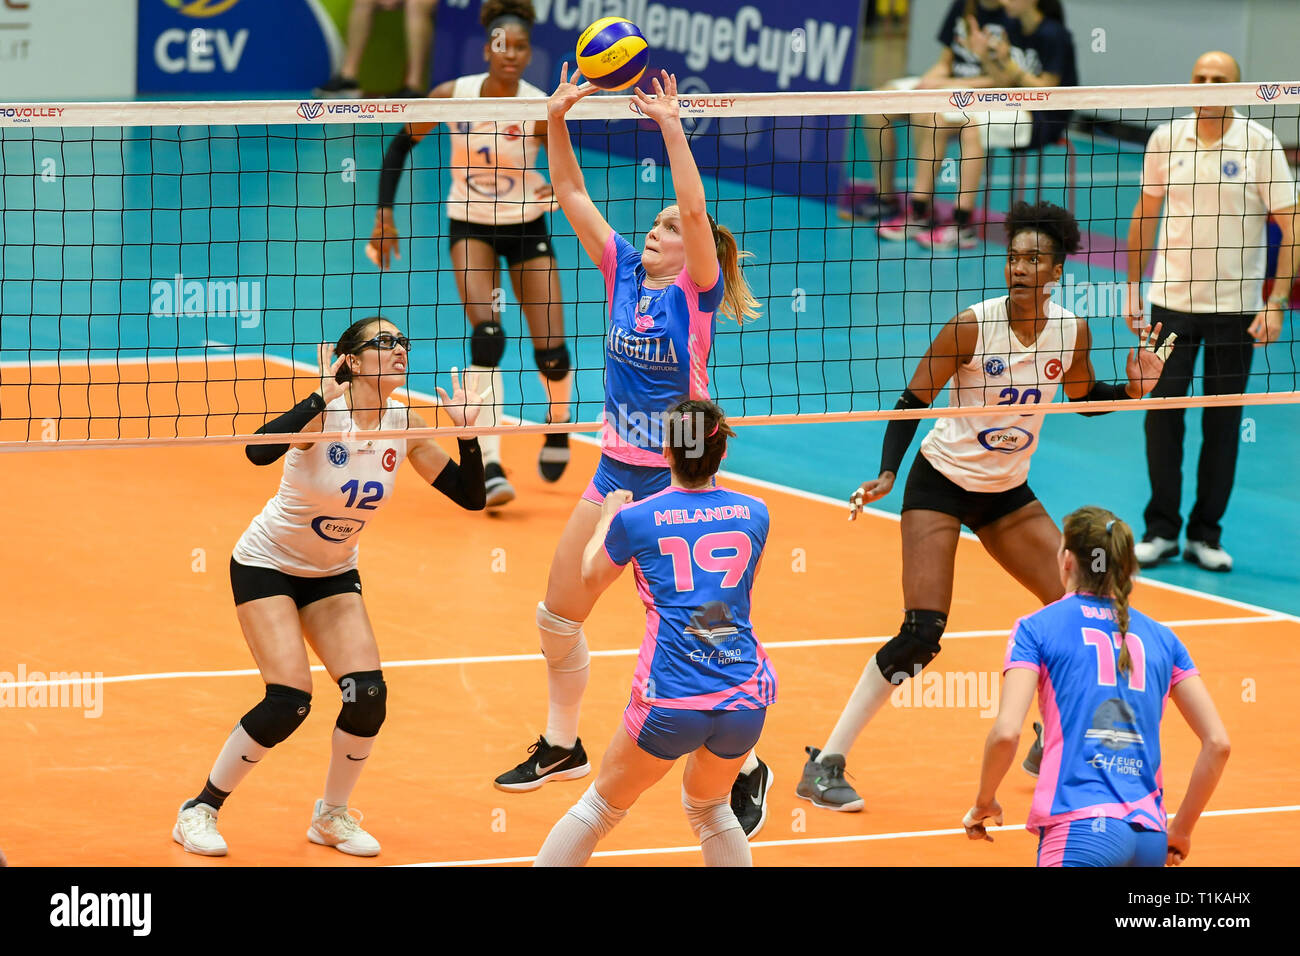 Candy Arena, Monza, Italy. 27th March, 2019. CEV Volleyball Challenge Cup  women, Final, 2nd leg. Micha Danielle Hancock of Saugella Monza during the  match between Saugella Monza and Aydin BBSK at the